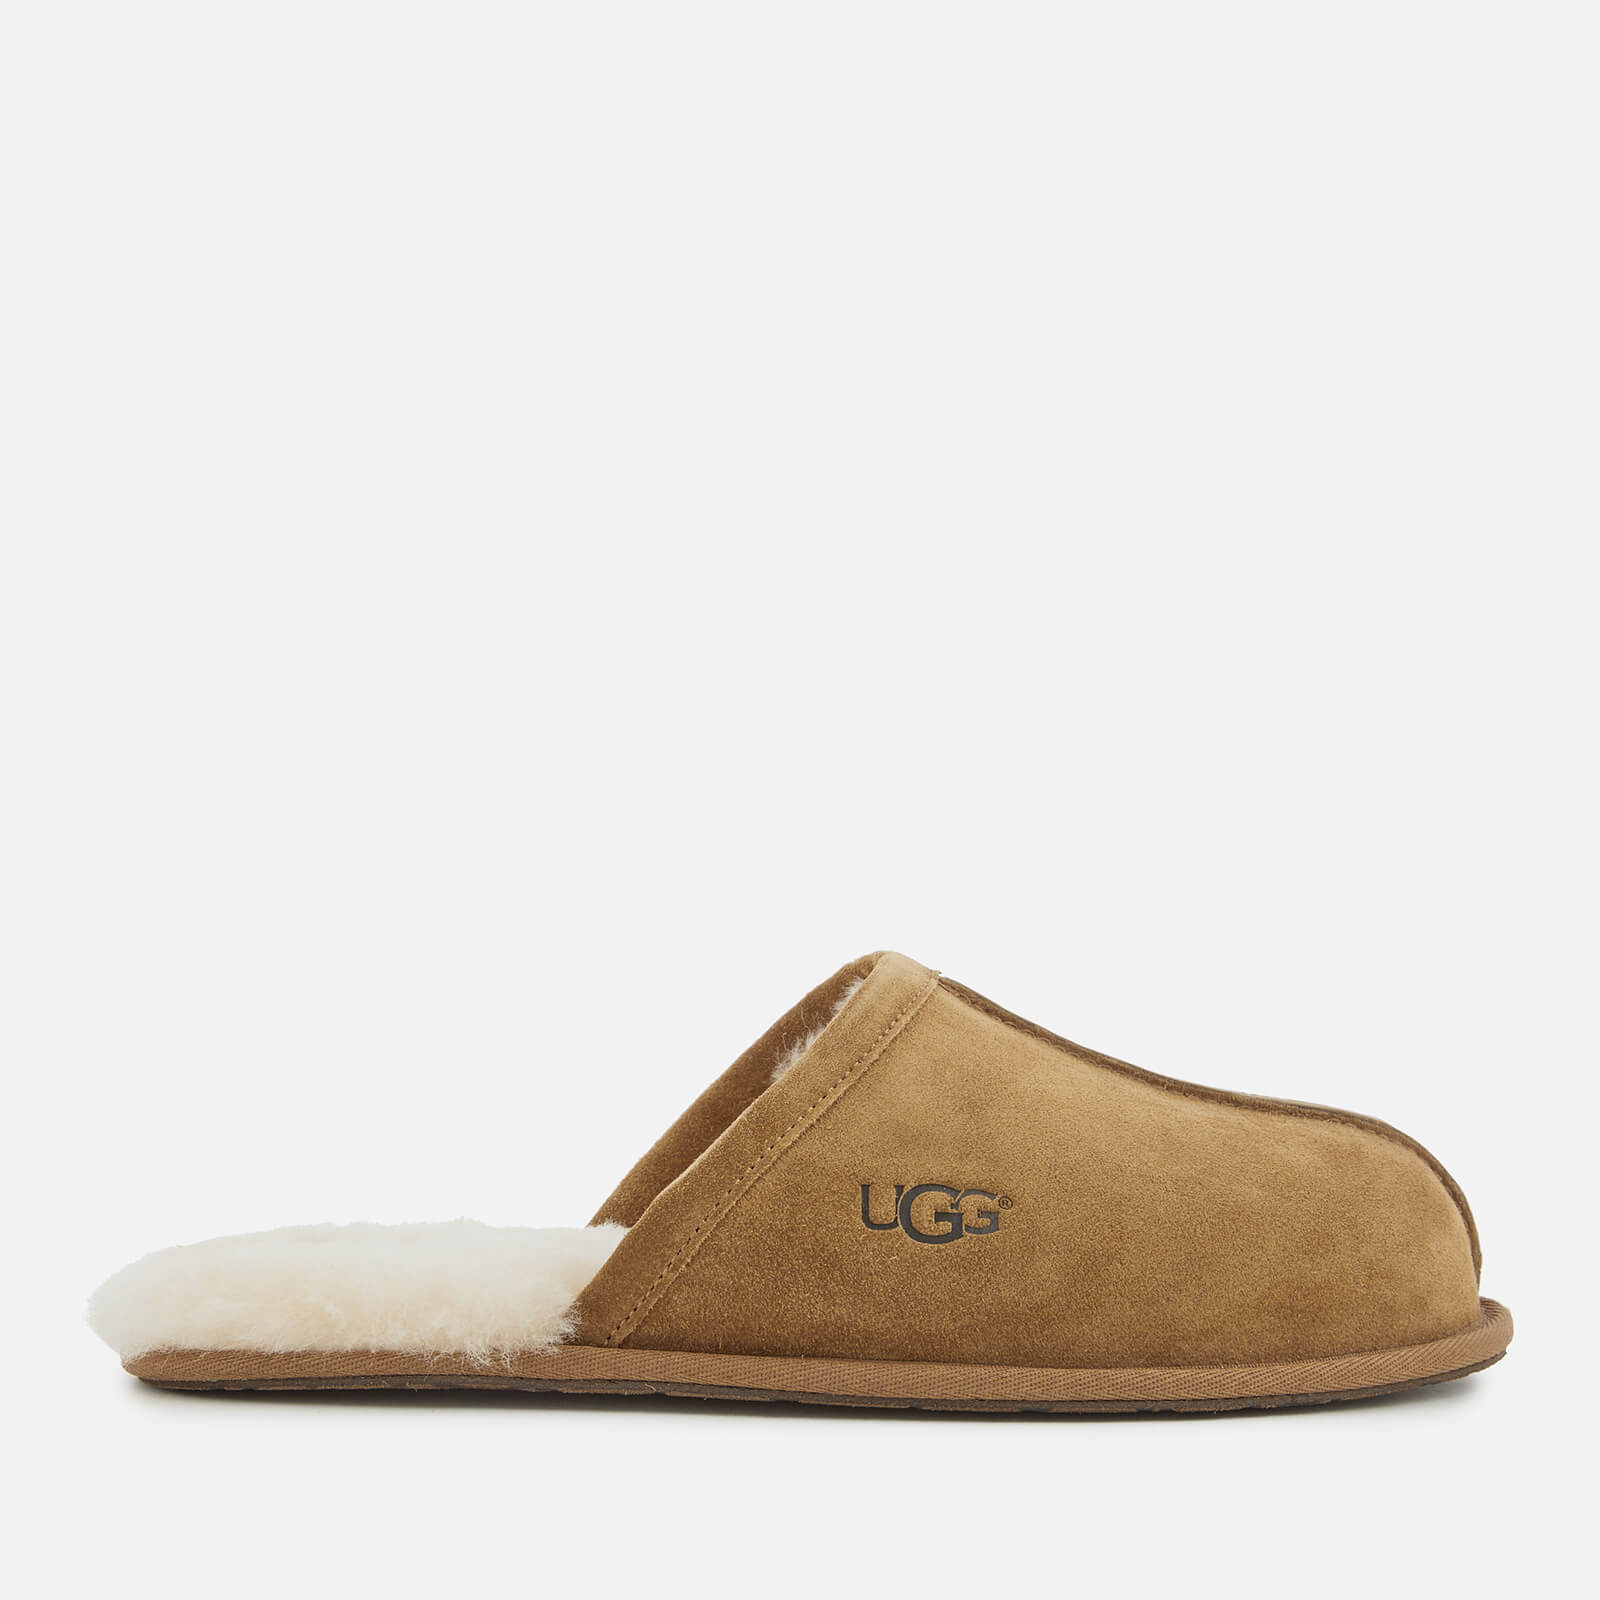 UGG Men's Scuff Suede Slippers - Chestnut (DO NOT USE) - UK 11